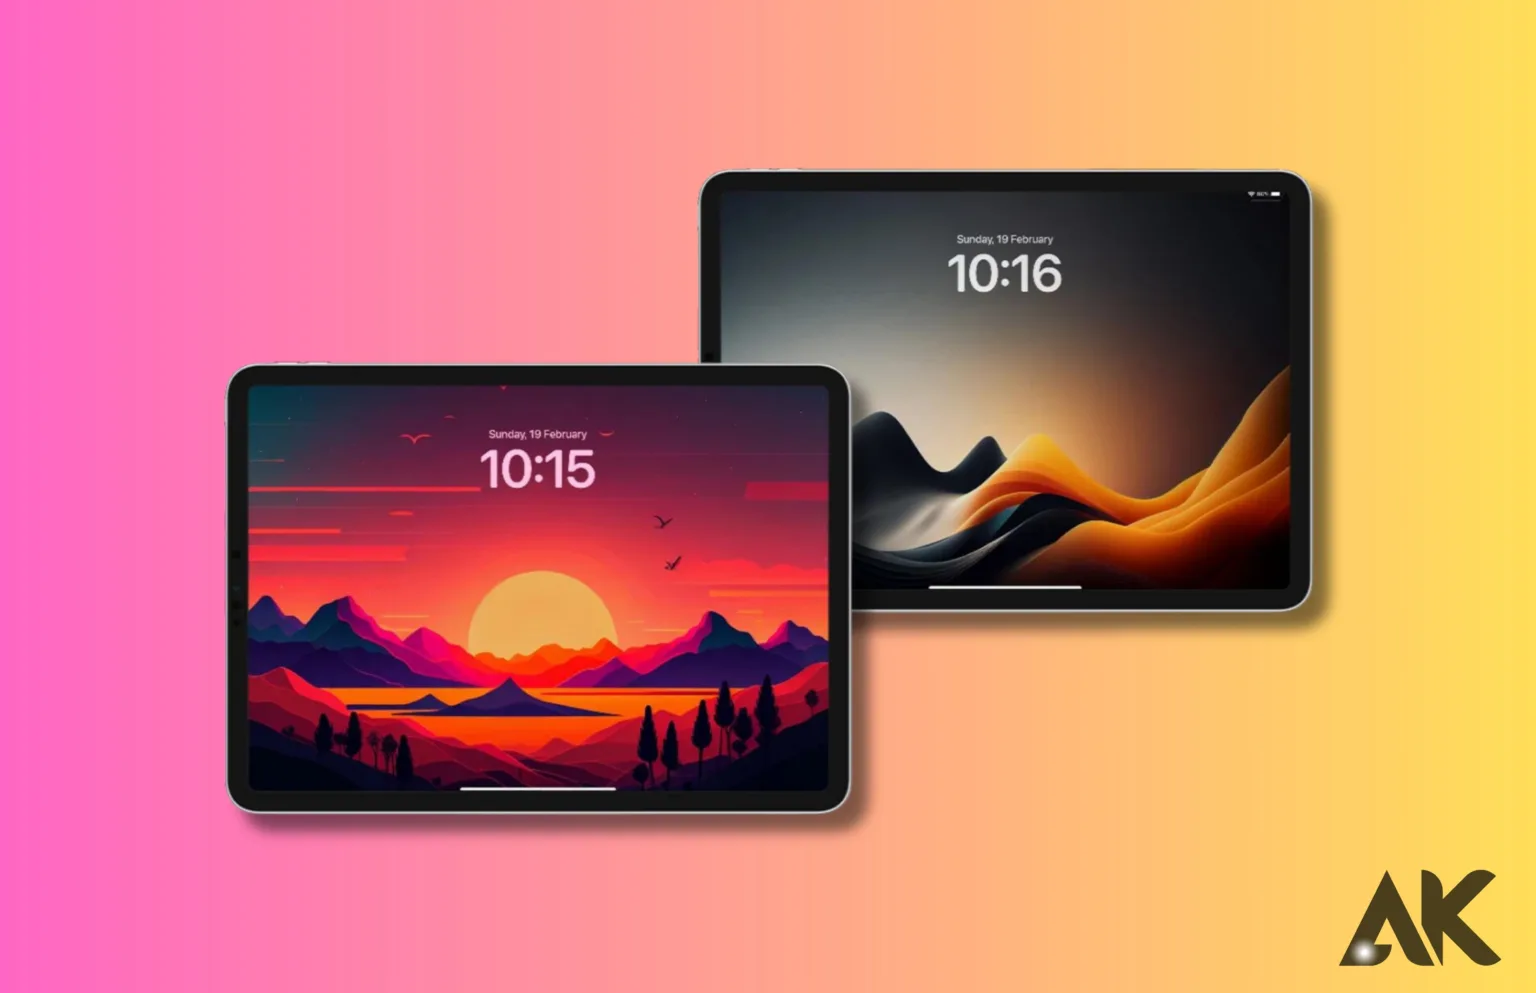 Adorable Wallpapers for Your iPad - Top 5 Types of Wallpapers